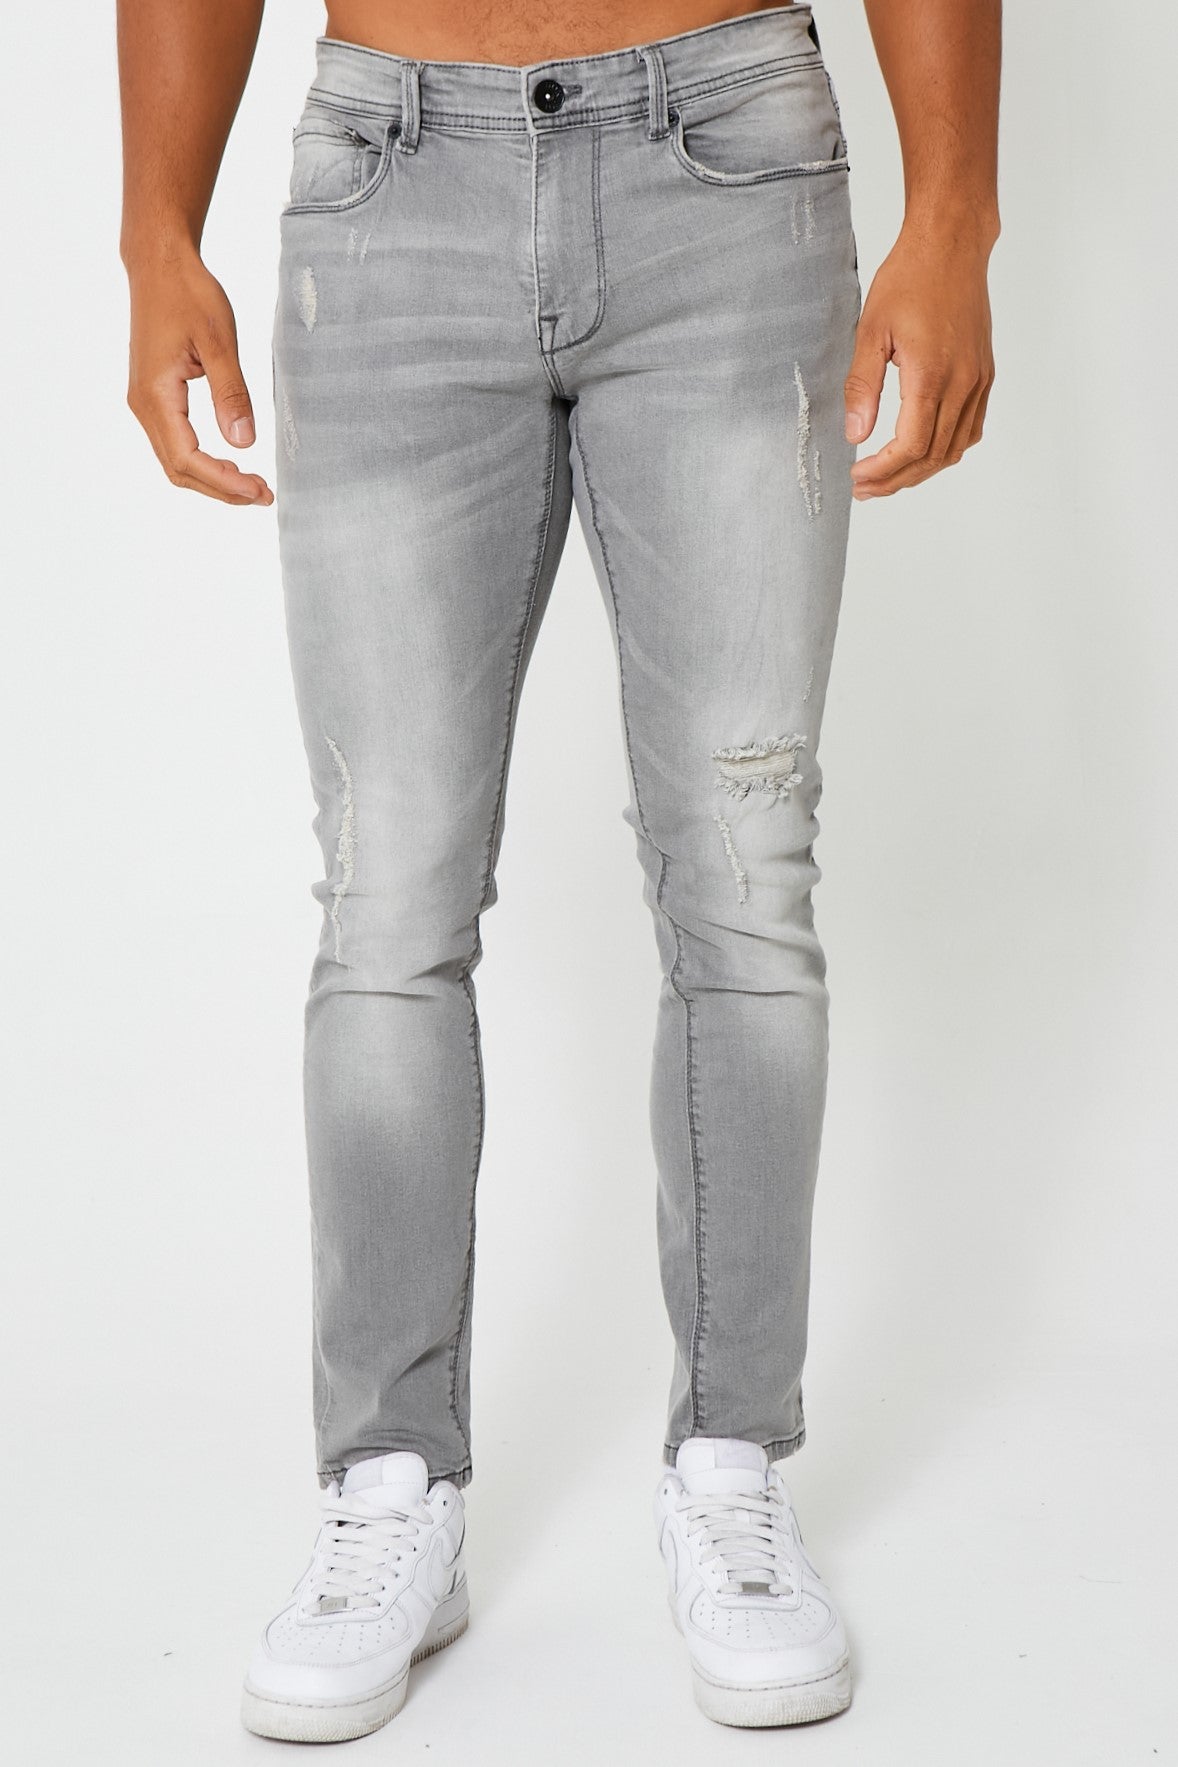 Hammer Smith Tapered Jean - Light Grey product